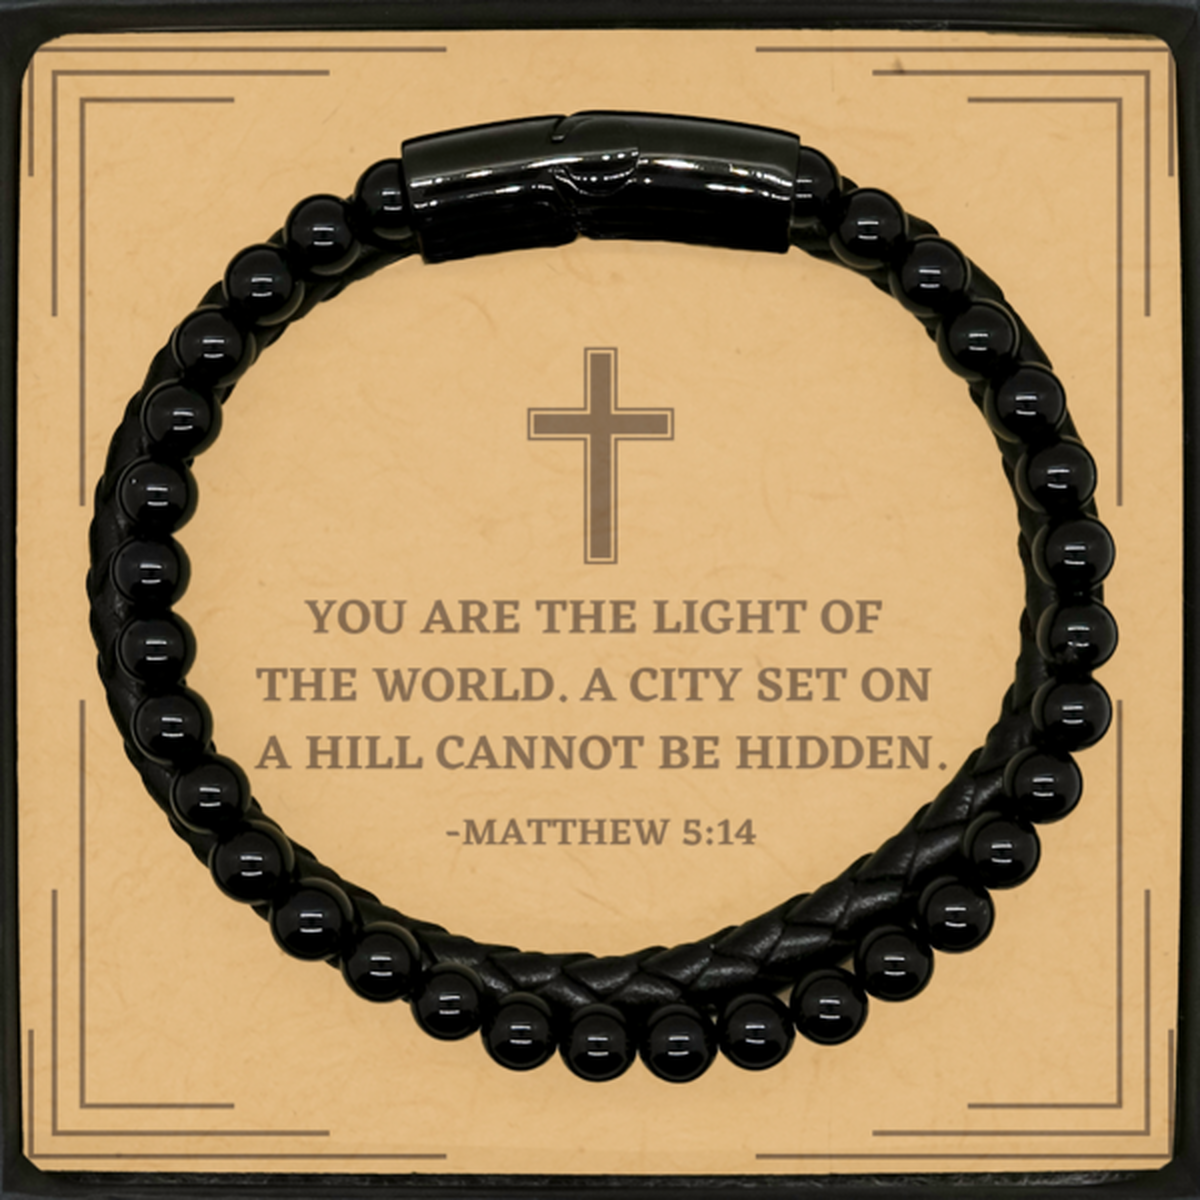 Baptism Gifts For Teenage Boys Girls, Christian Bible Verse Stone Leather Bracelet, You are the light of the world, Confirmation Gifts, Bible Verse Card for Son, Godson, Grandson